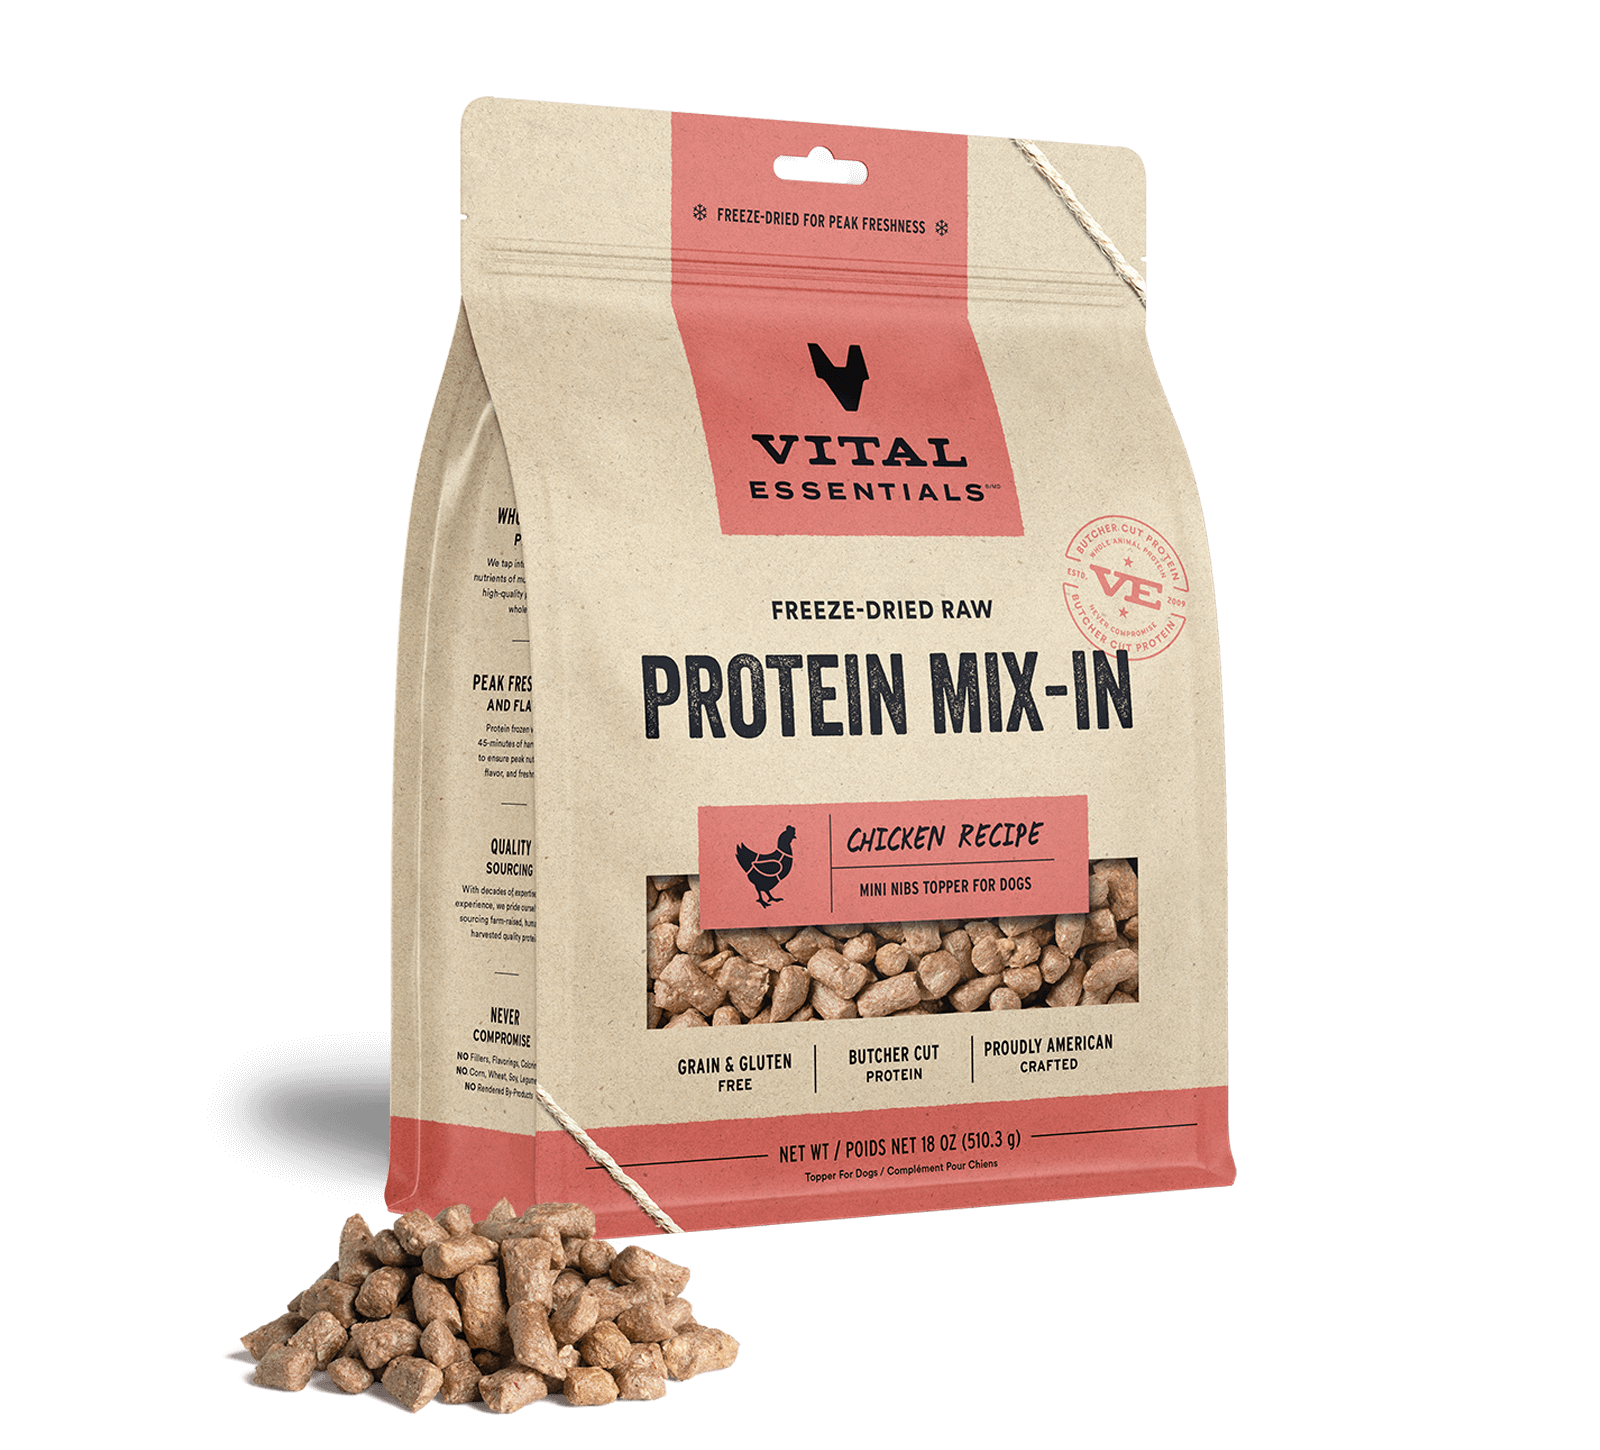 Vital Essentials Freeze-Dried Raw Protein Mix-In Chicken Recipe Mini Nibs Topper for Dogs, 18 oz - Health/First Aid